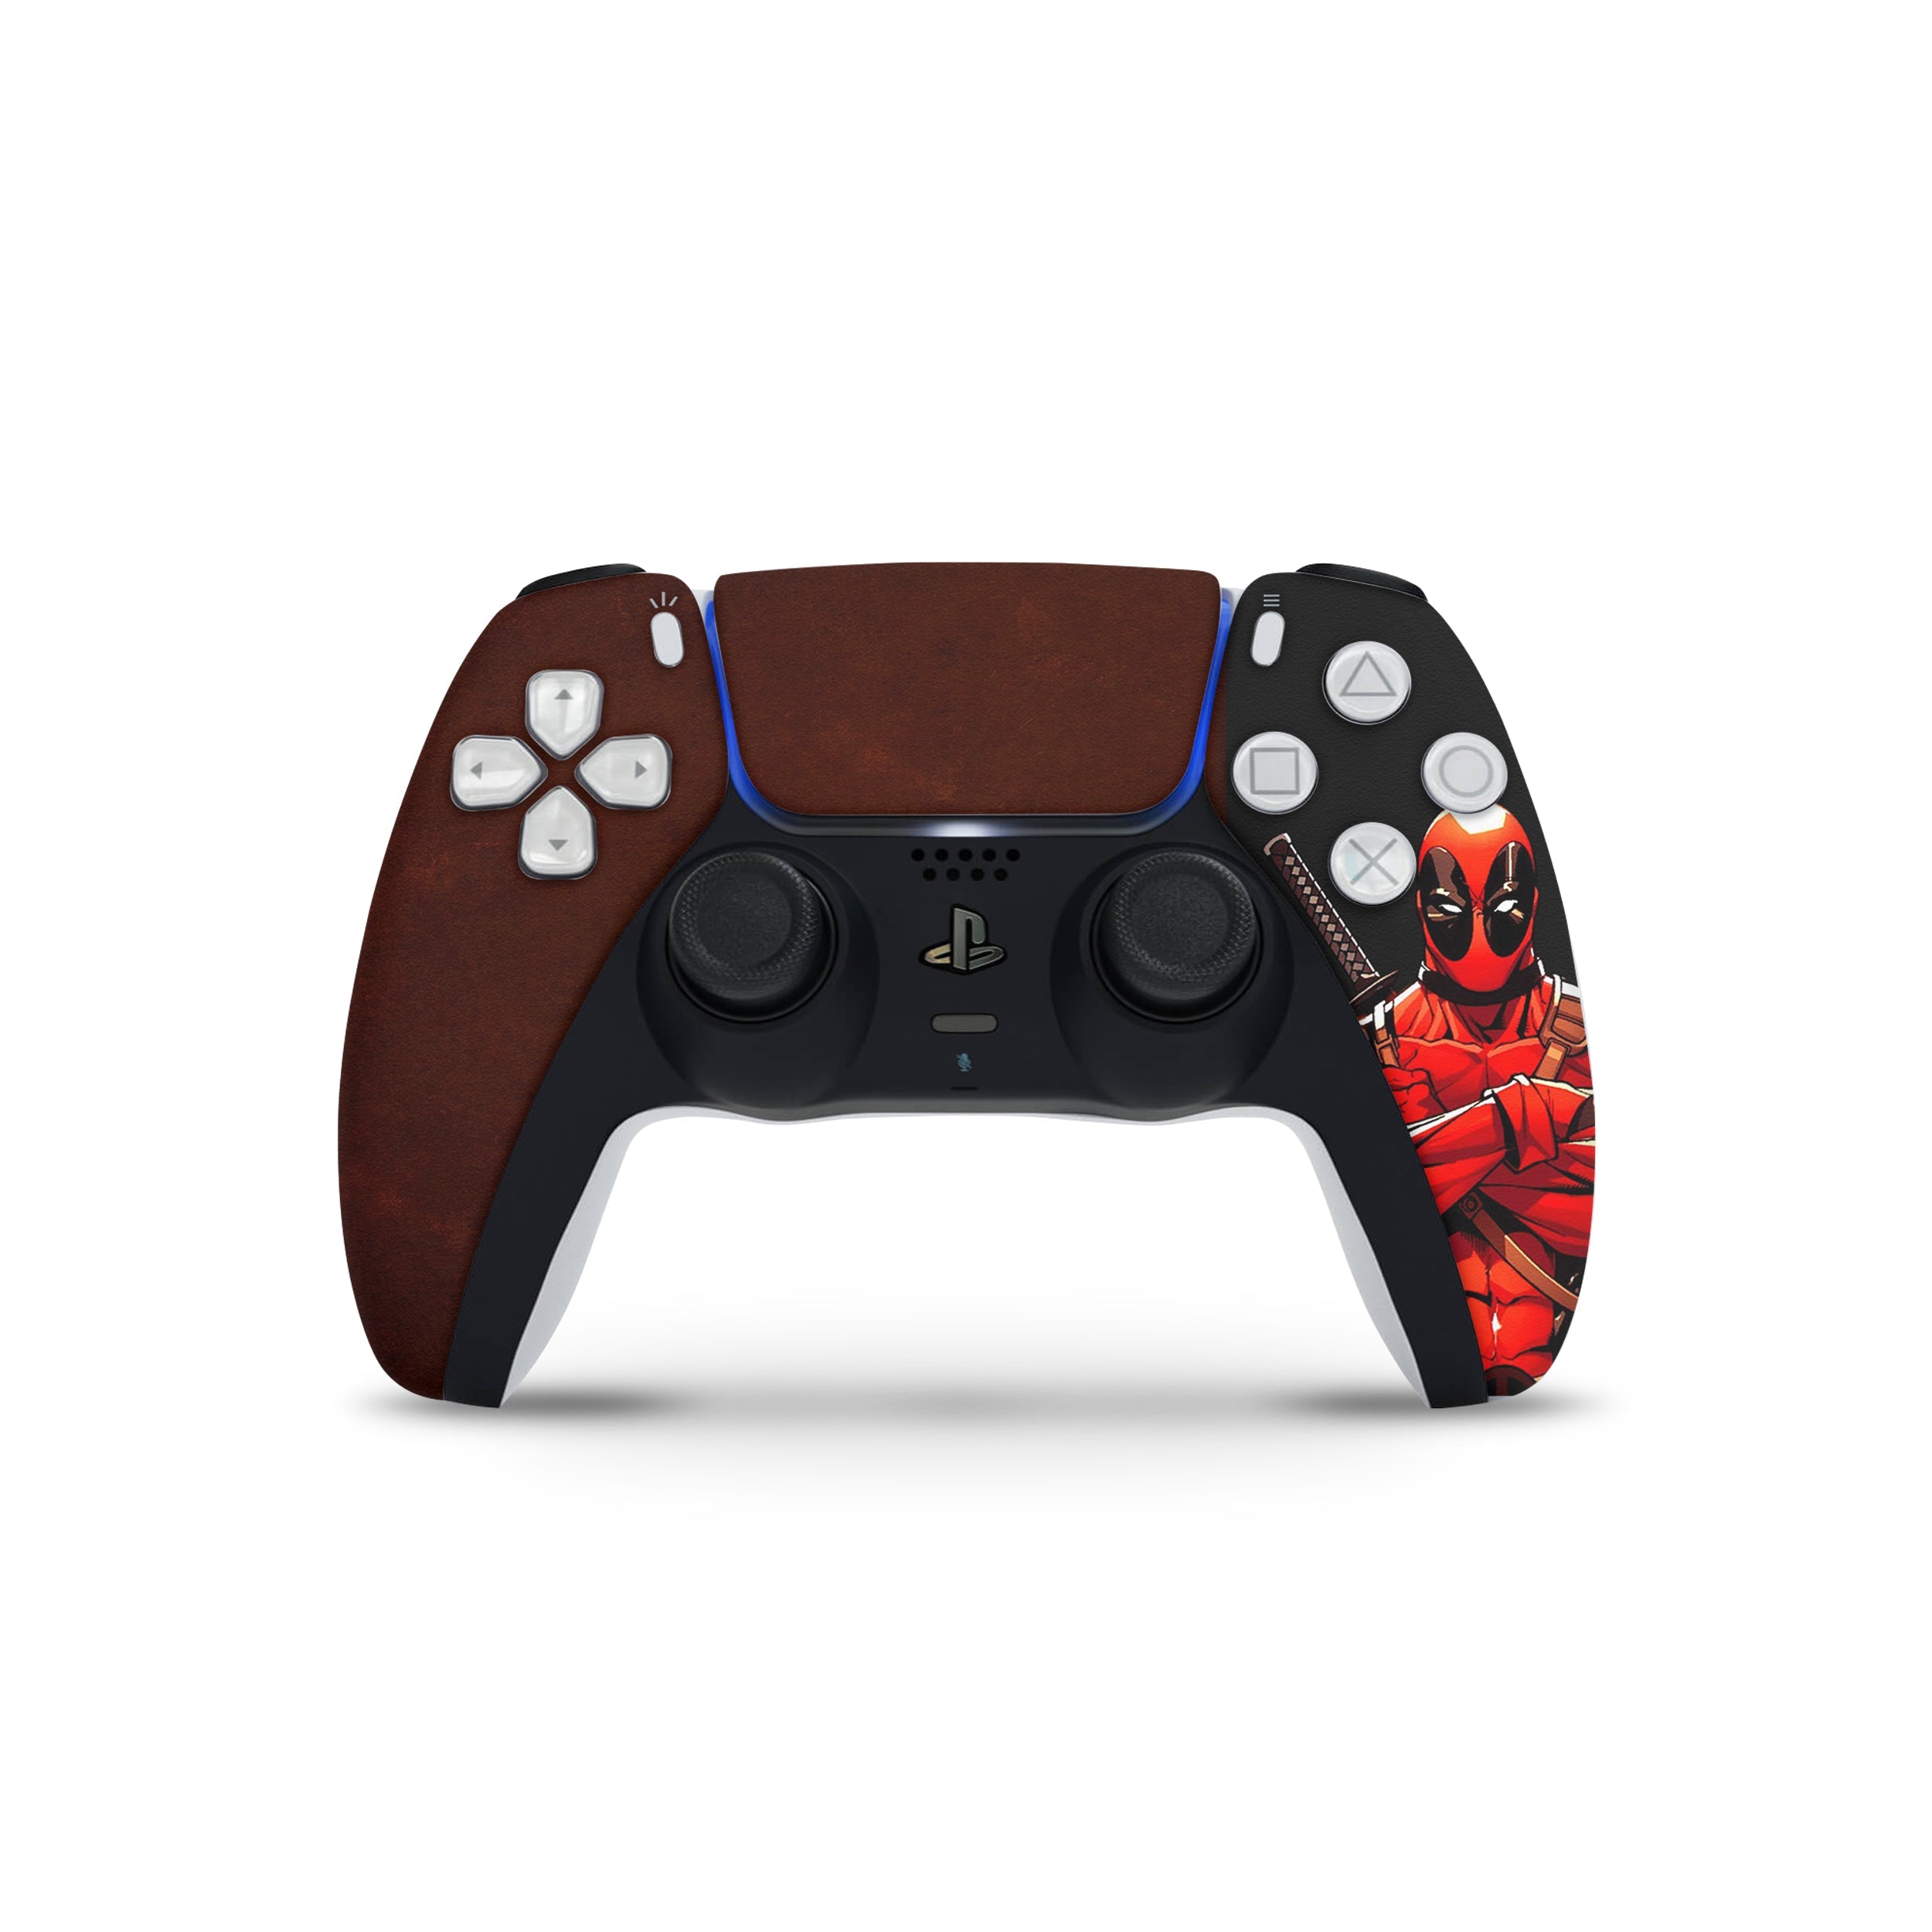 A video game skin featuring a Marvel Comics Deadpool design for the PS5 DualSense Controller.